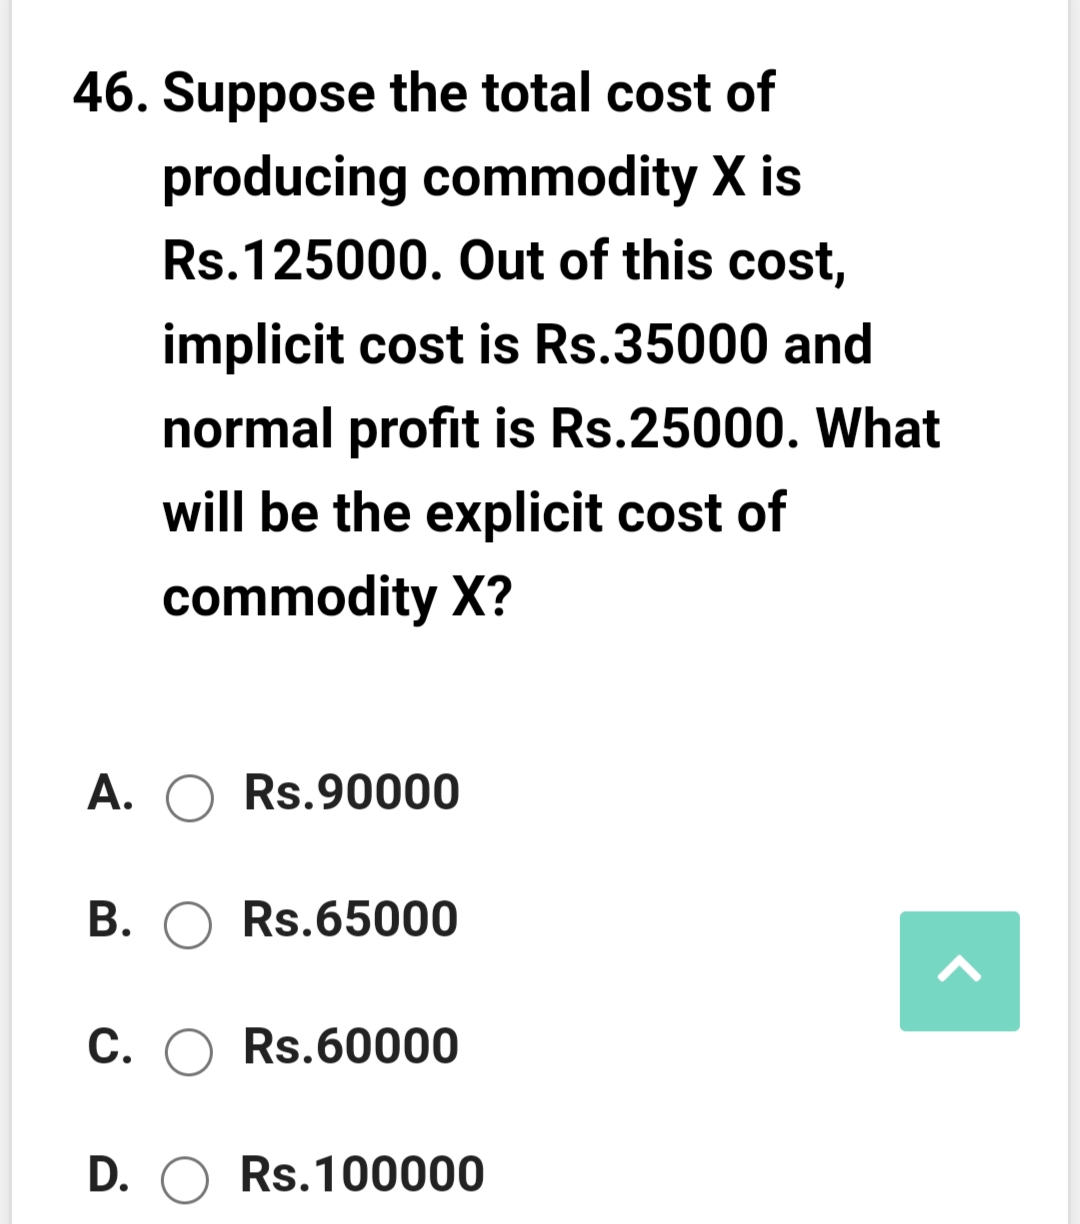 46. Suppose the total cost of
producing commodity X is
Rs.125000. Out of this cost,
implicit cost is Rs.35000 and
normal profit is Rs.25000. What
will be the explicit cost of
commodity X?
A. O Rs.90000
B. O Rs.65000
C. O Rs.60000
D. O Rs.100000
